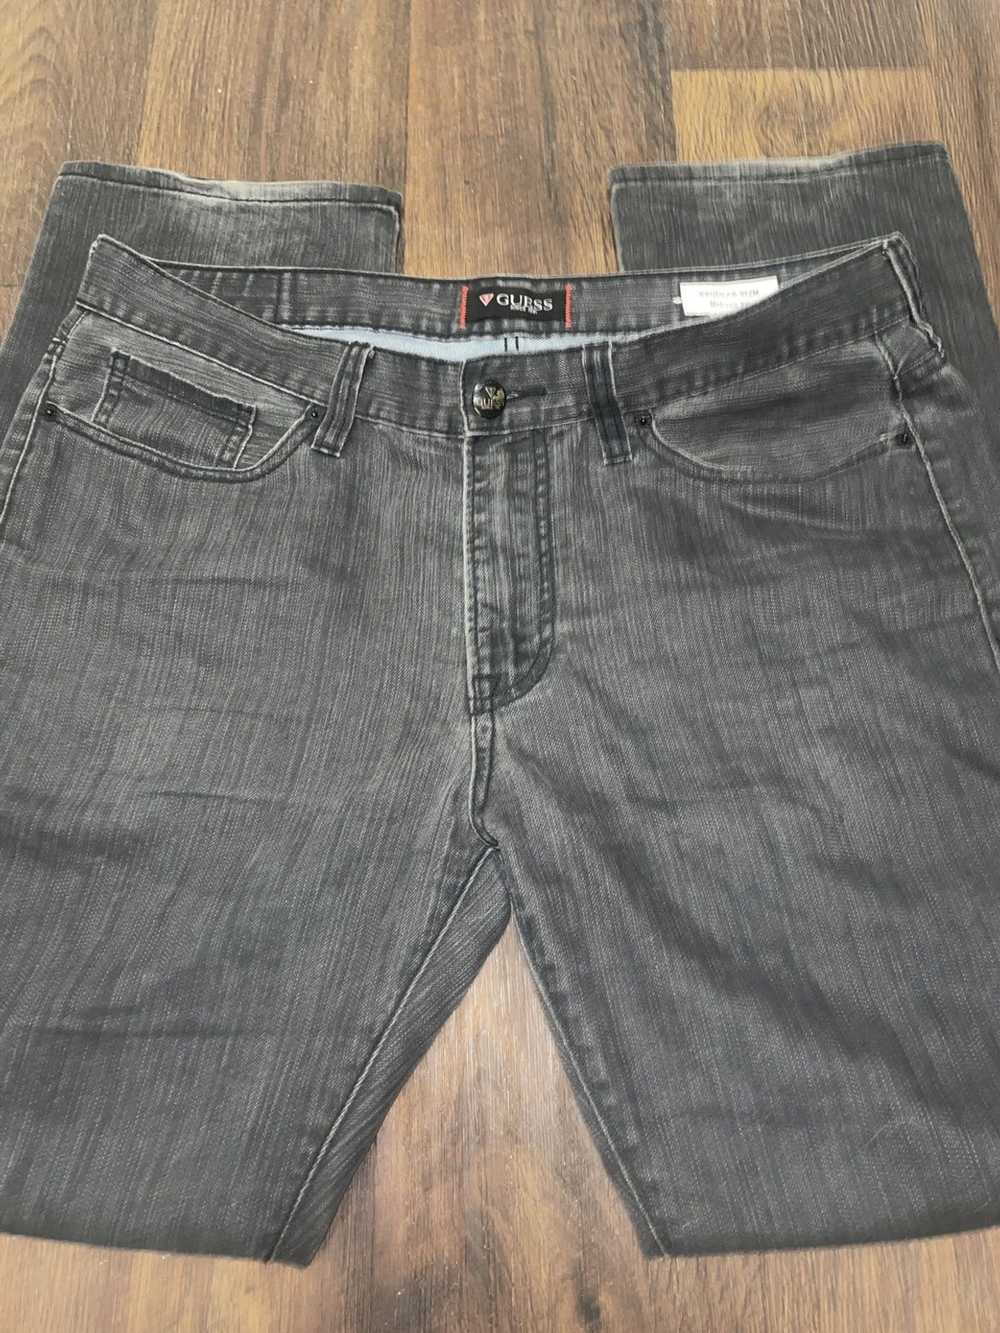 Guess Vintage GUESS jeans - image 2